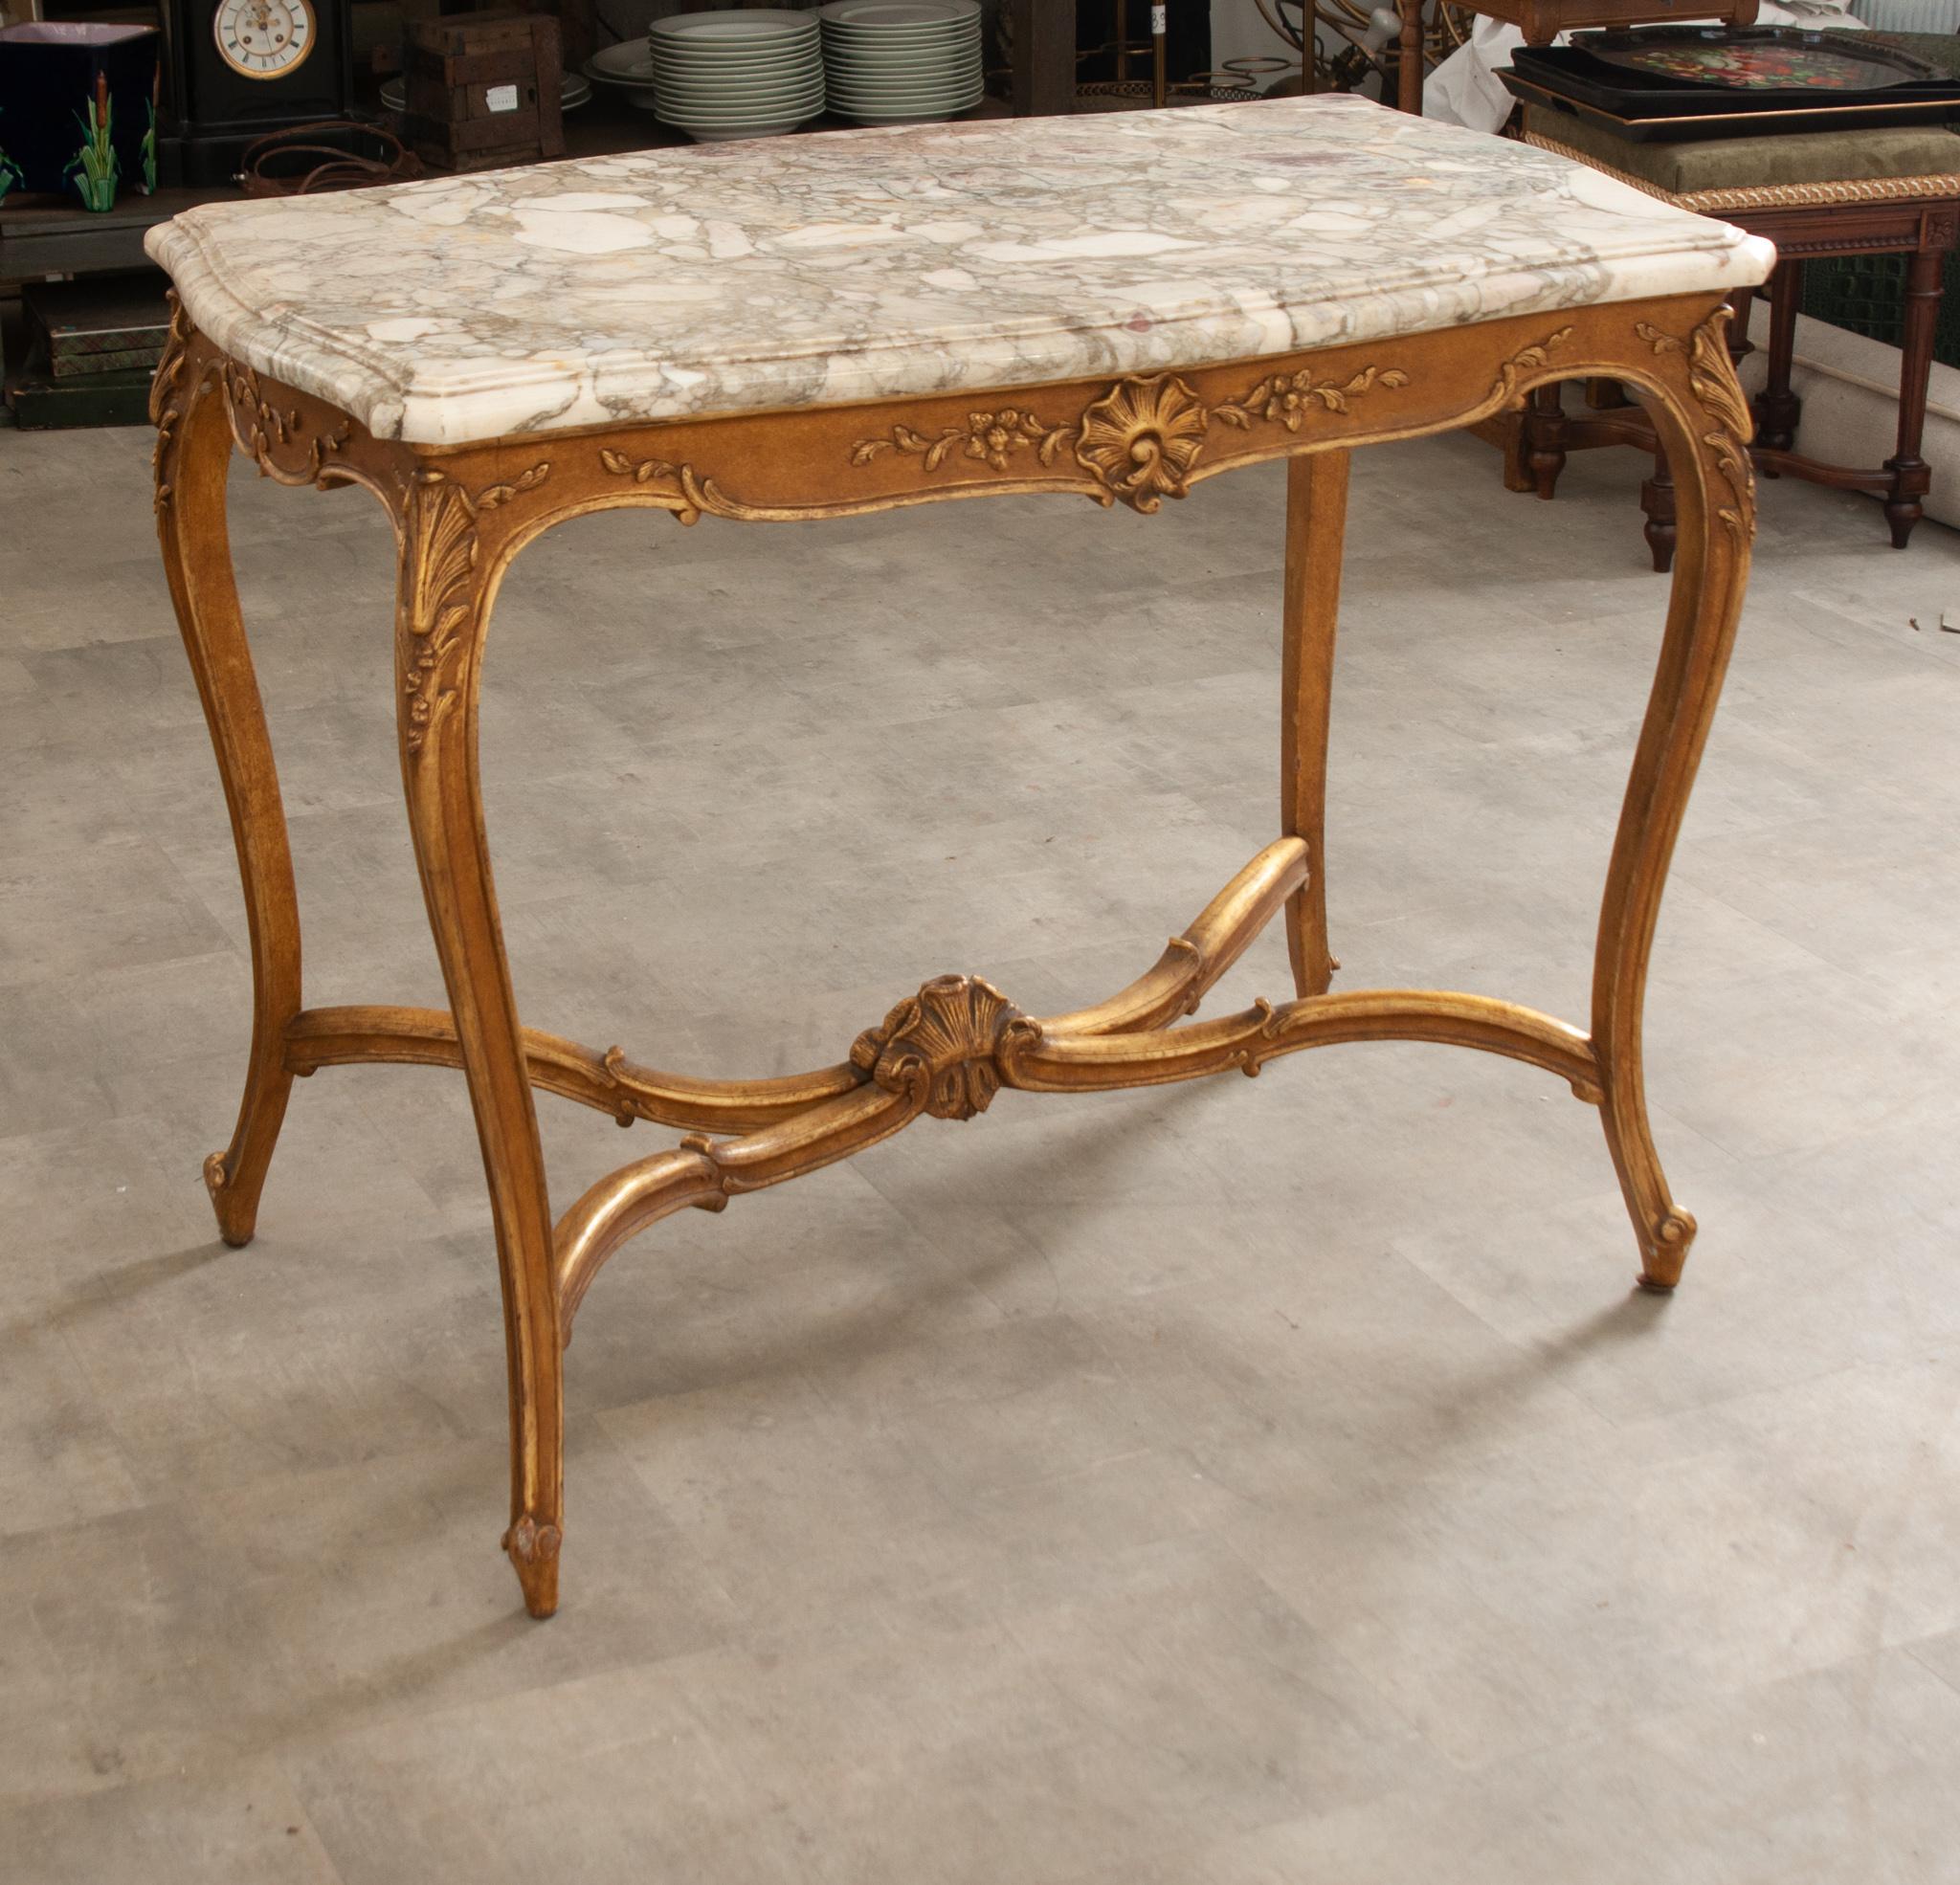 Its original shaped and beveled marble top has wonderful coloring throughout and is removable for transport. The painted and gilt base has a scalloped and carved apron featuring floral and shell motifs and flanked by scrolls and more foliage on the